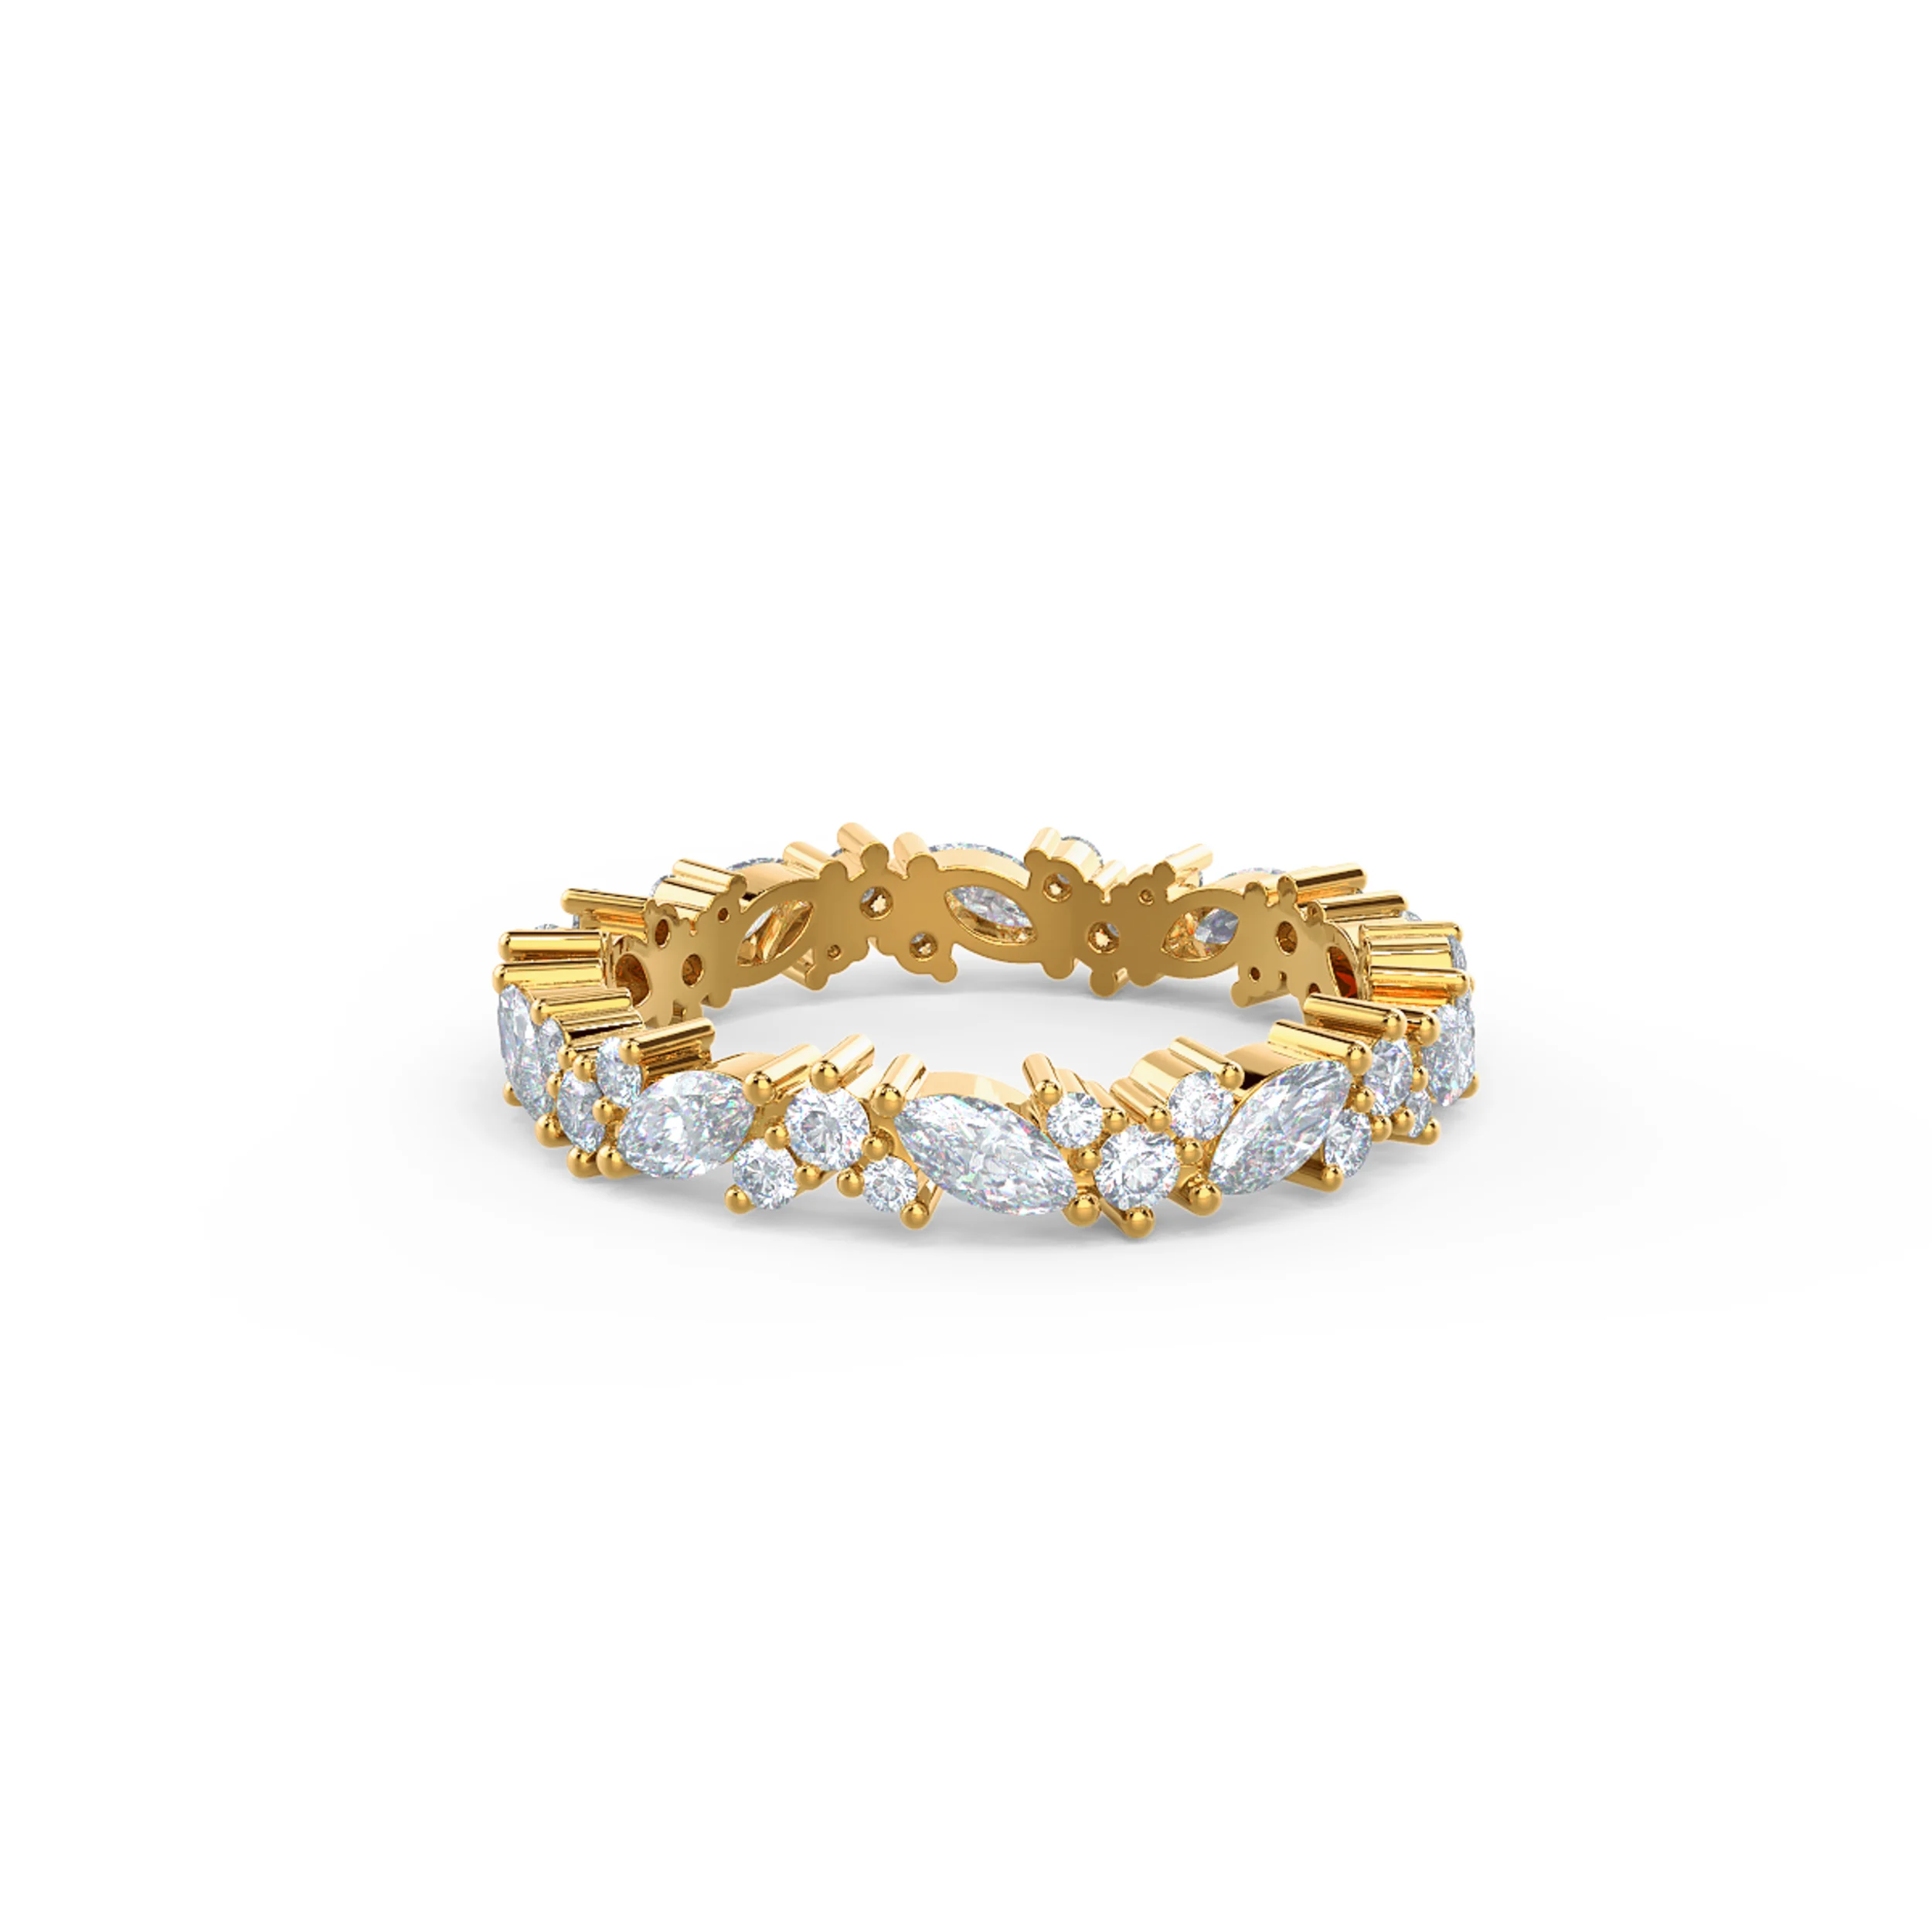 18k Yellow Gold Jessica Eternity Band featuring 1.35 ctw Man Made Diamonds (Main View)